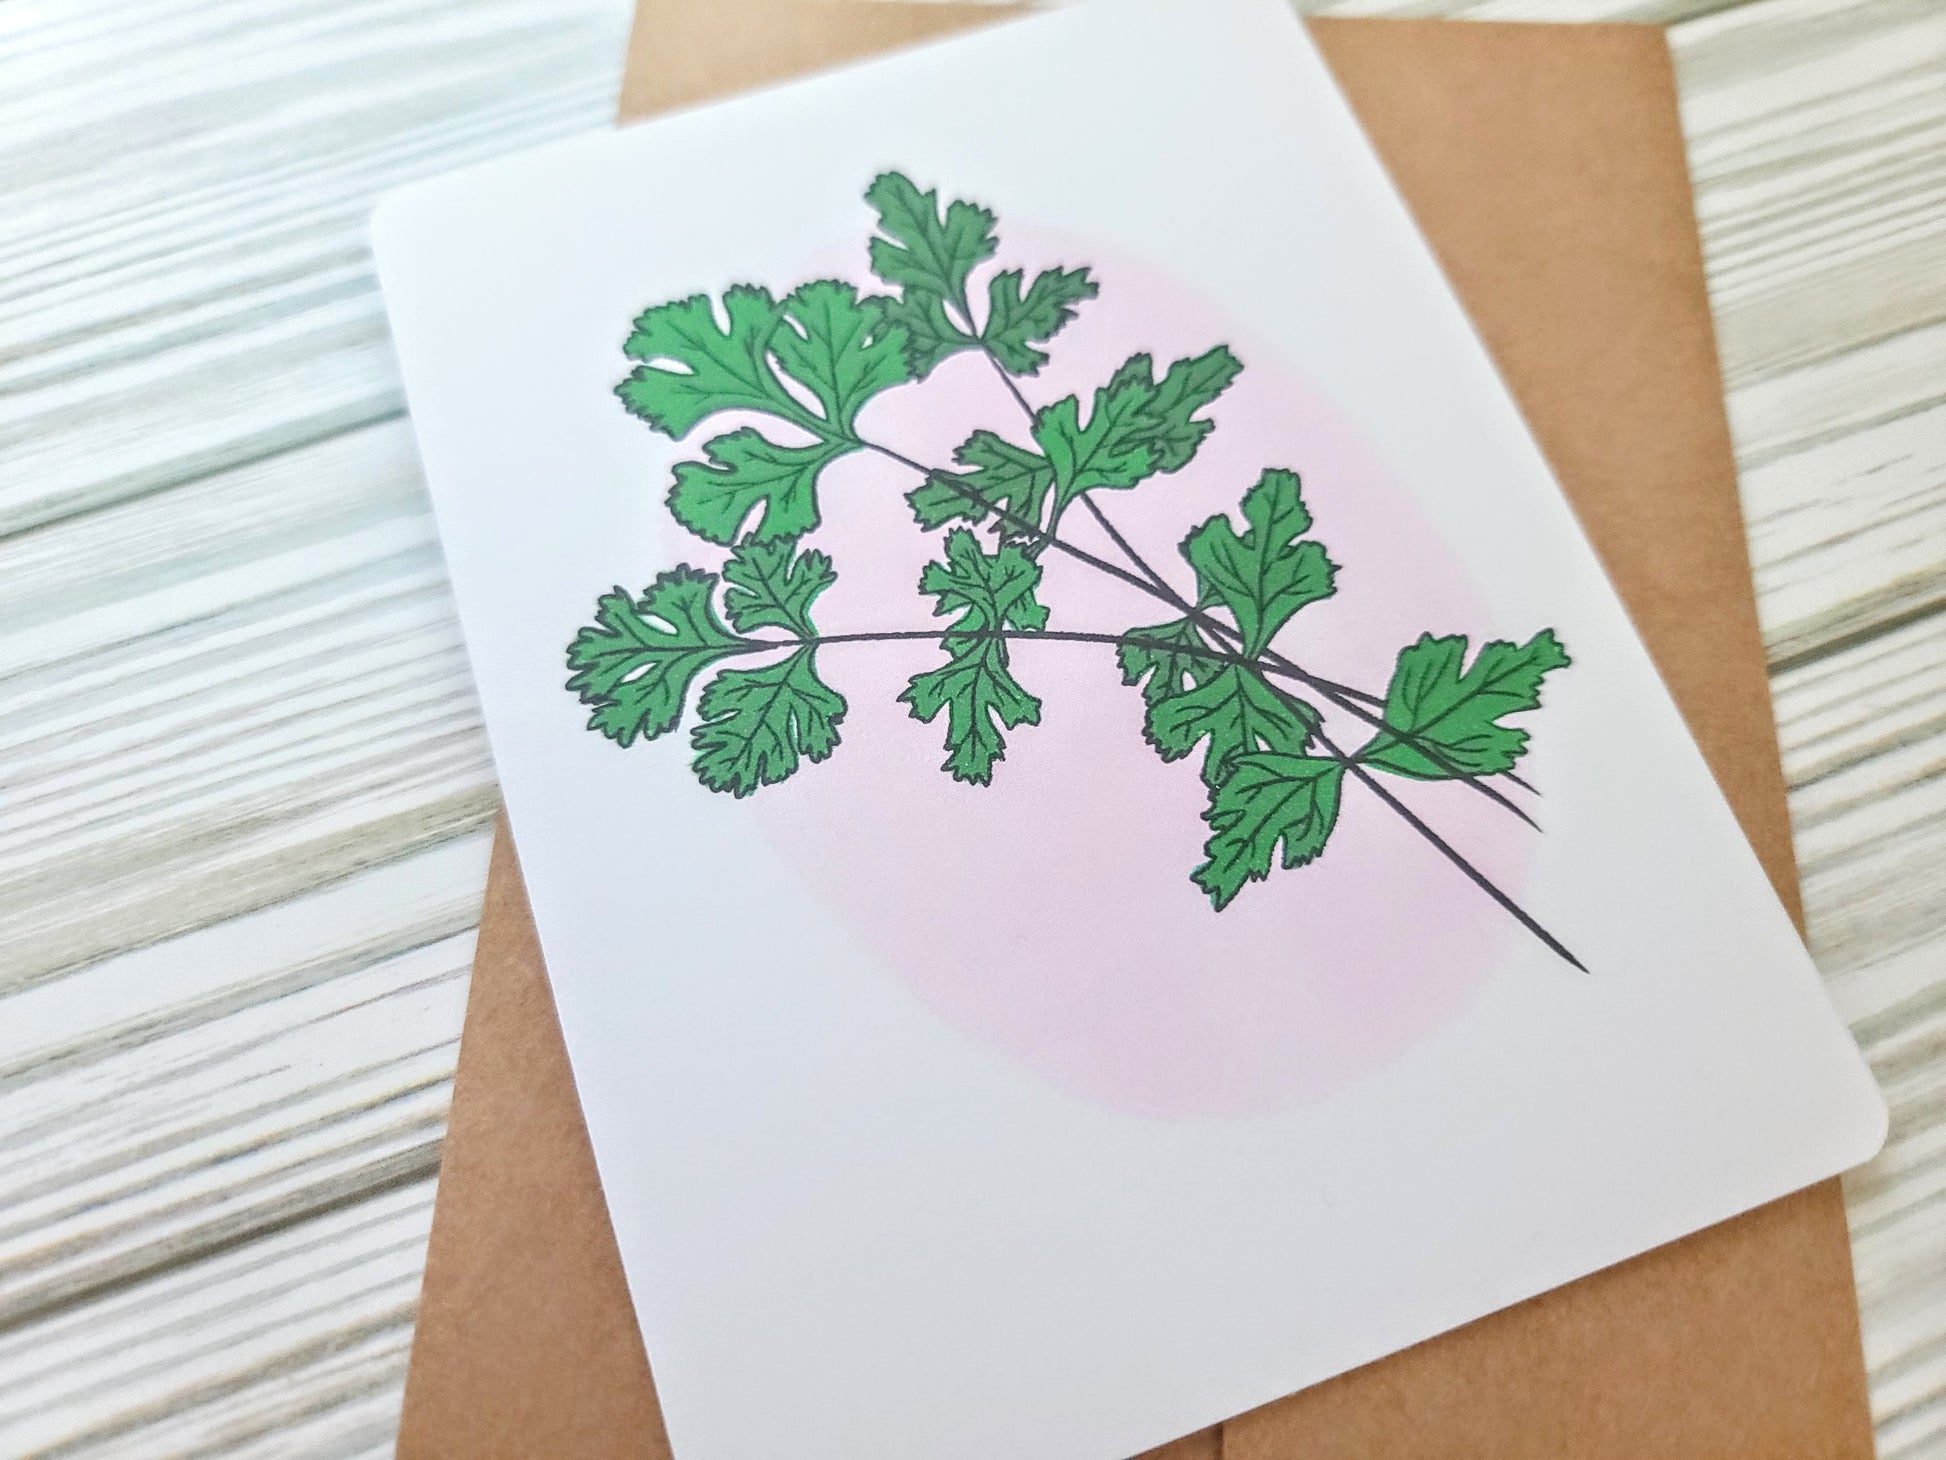 Cilantro Handmade Greeting Card - Recycled Paper and Kraft Envelope - Angled Overhead Shot